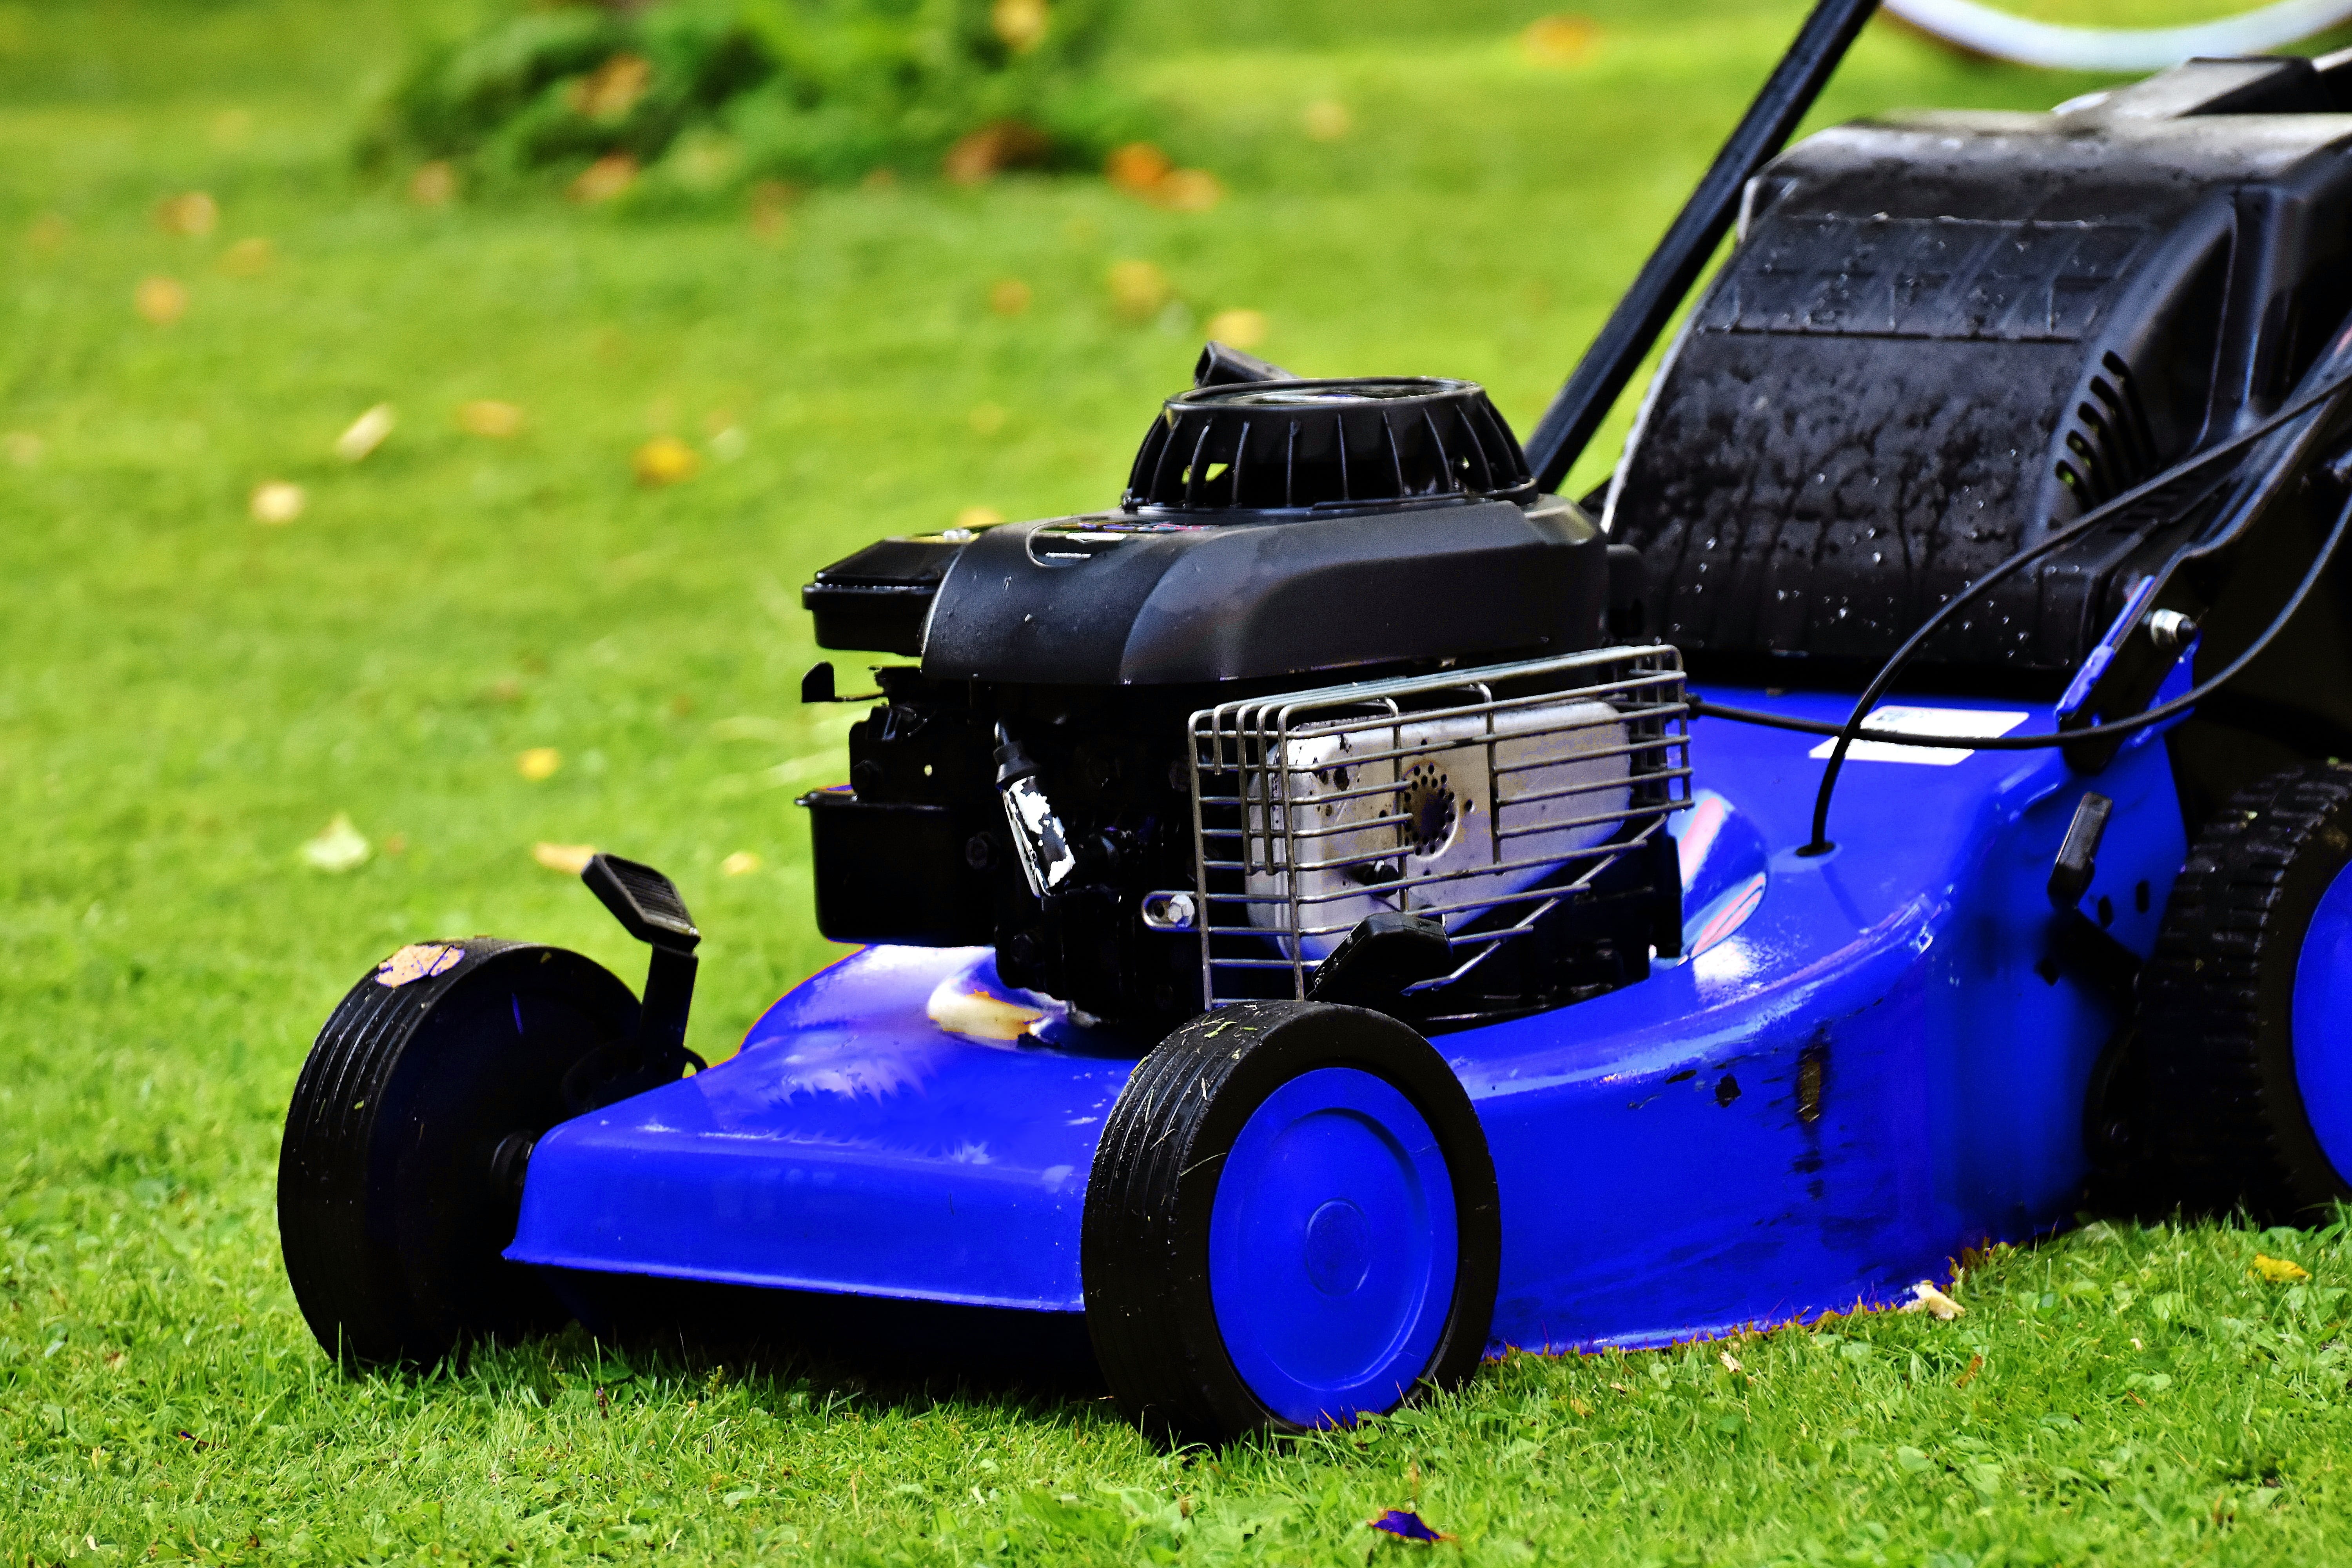 blue lawn mower, lawn mowing, landscaping, summer, nature, grass